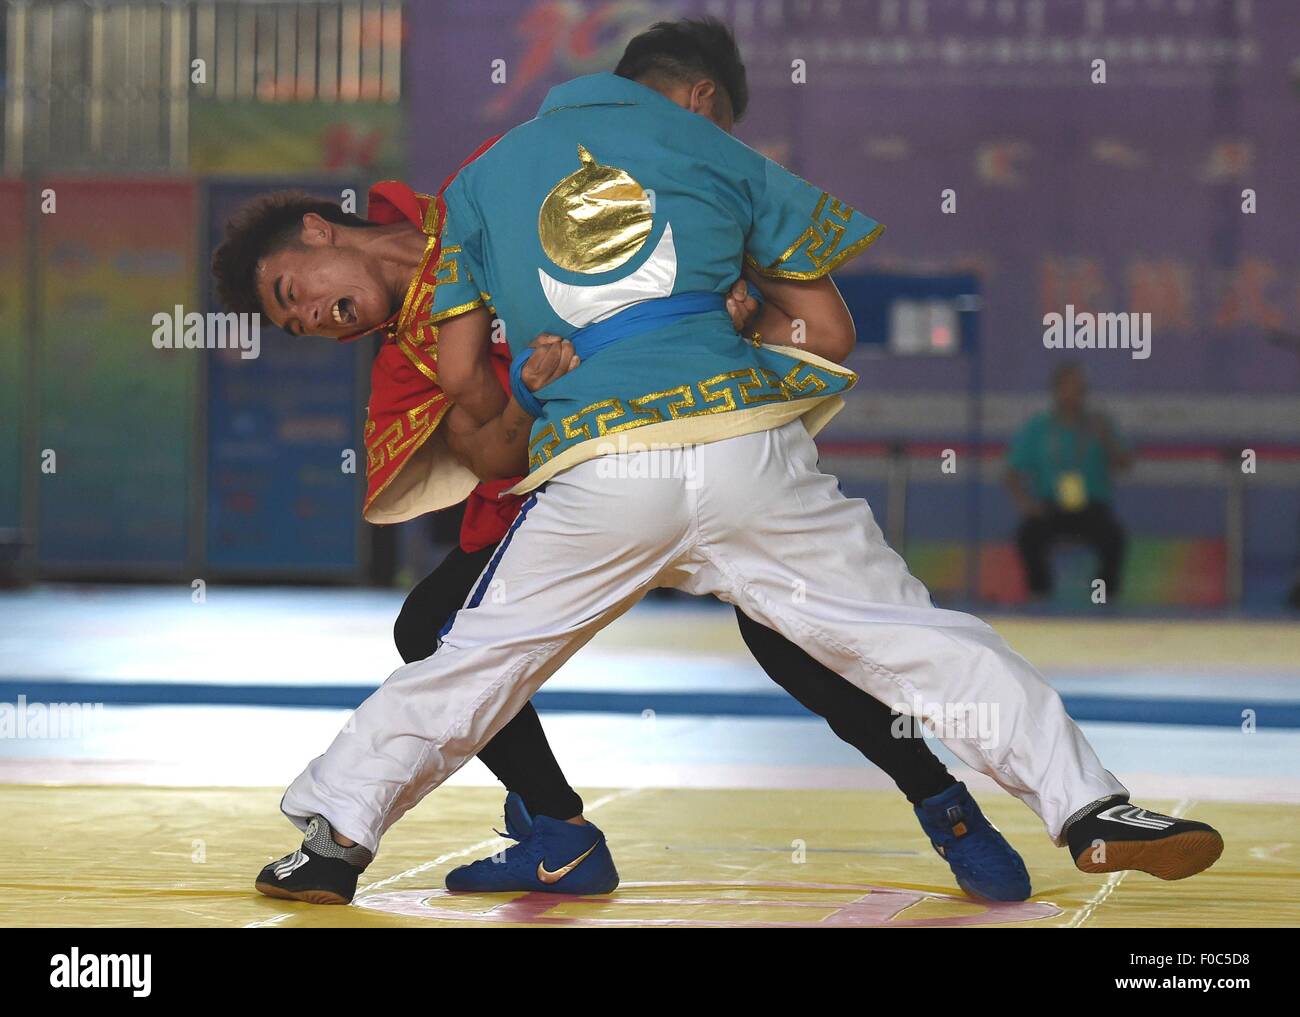 Ordos, China's Inner Mongolia Autonomous Region. 12th Aug, 2015. Athletes compete in a match of Tibetan-style wrestling during the 10th National Traditional Games of Ethnic Minorities of China in Ordos, north China's Inner Mongolia Autonomous Region, Aug. 12, 2015. In the event of wrestling of the ethnic minorities, athletes competed in 6 kinds of matches, namely the Tibetan-style wrestling, Mongolian-style wrestling, Korean-style wrestling, Hui-style wrestling, Yi-style wrestling and Uygurian-style wrestling. © Lin Yiguang/Xinhua/Alamy Live News Stock Photo